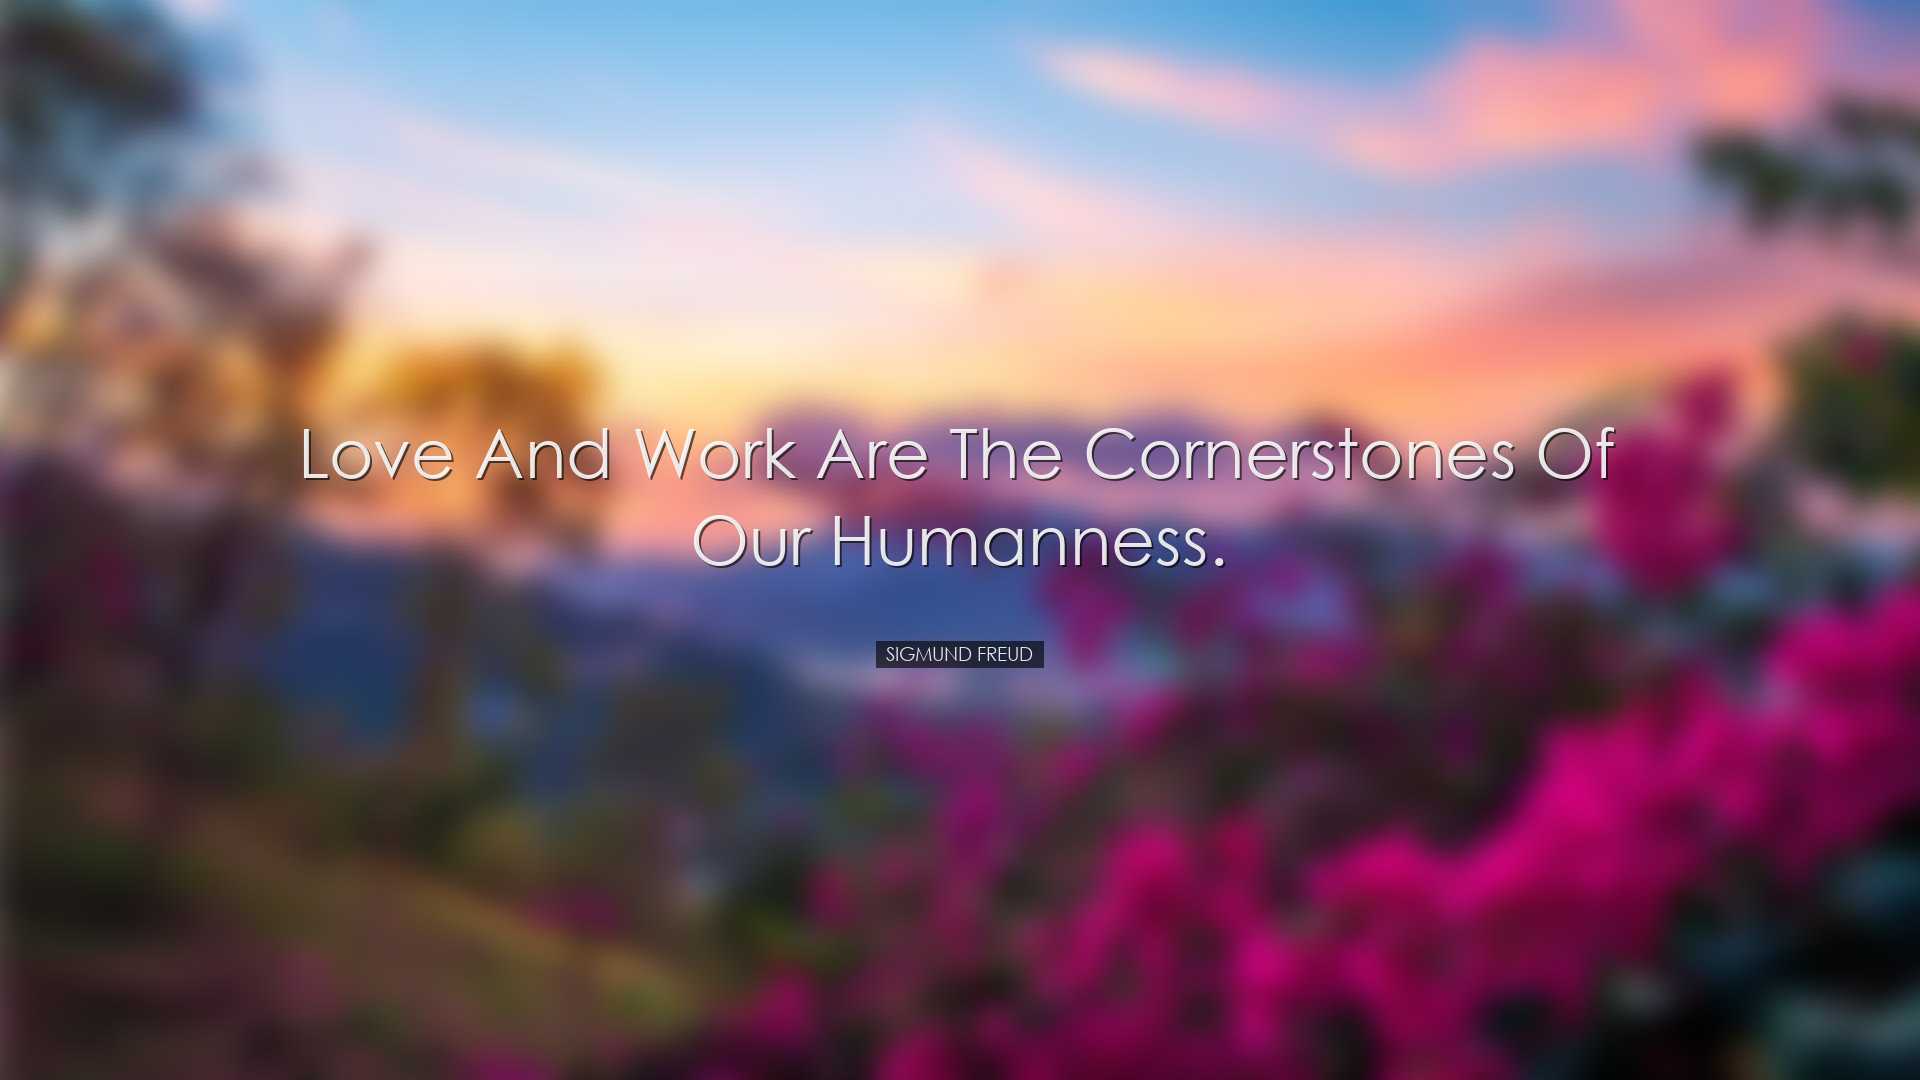 Love and work are the cornerstones of our humanness. - Sigmund Fre